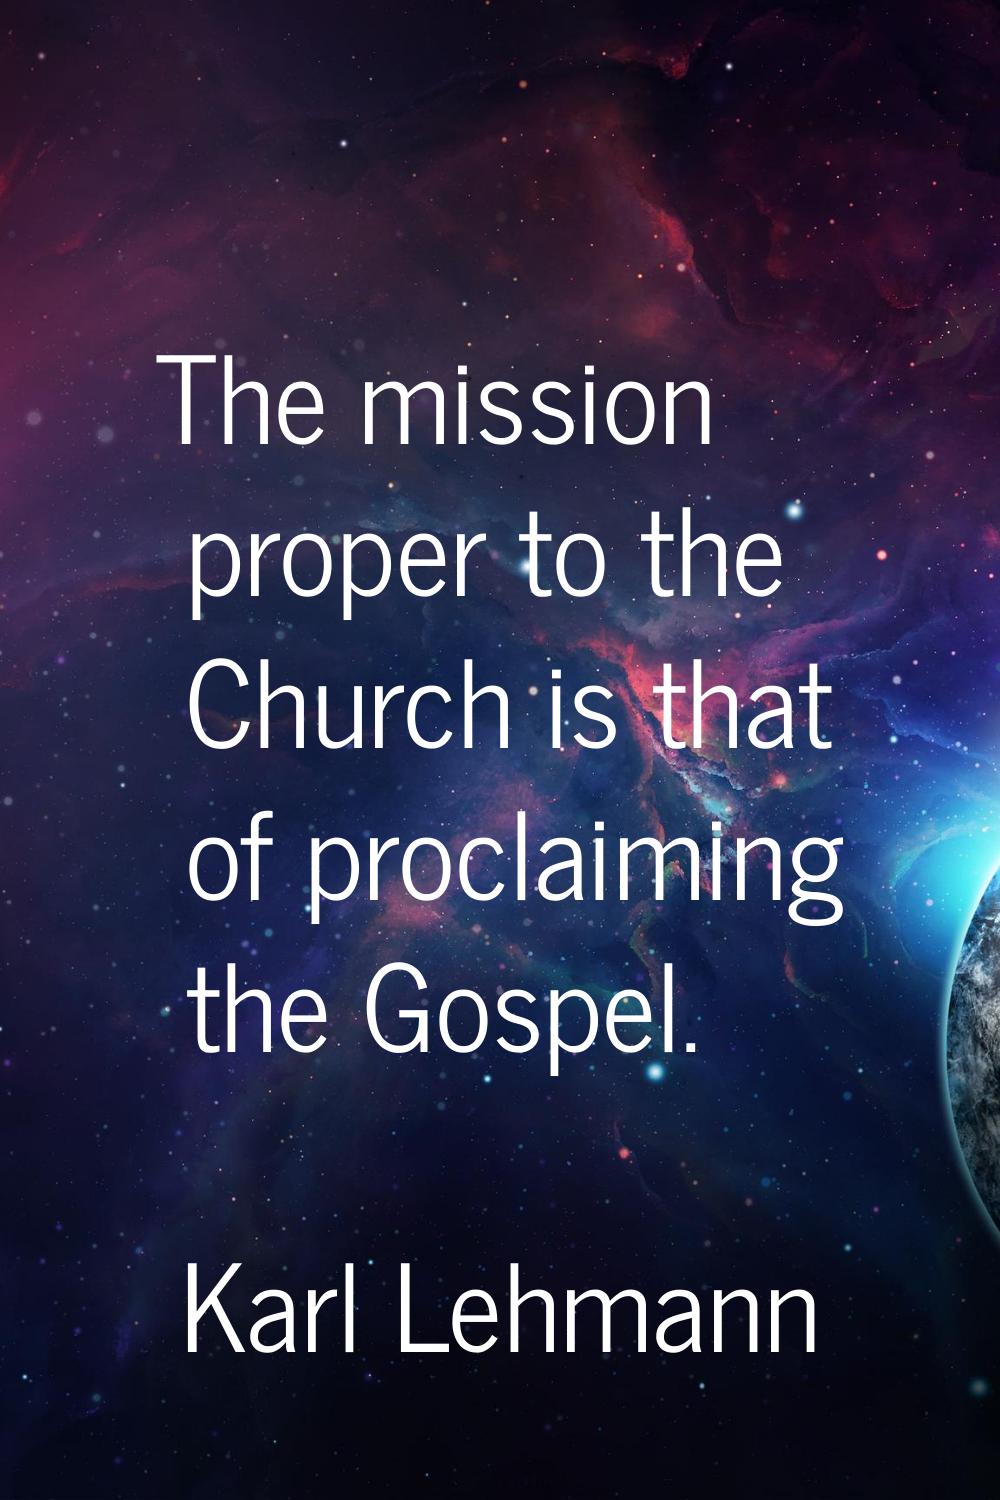 The mission proper to the Church is that of proclaiming the Gospel.